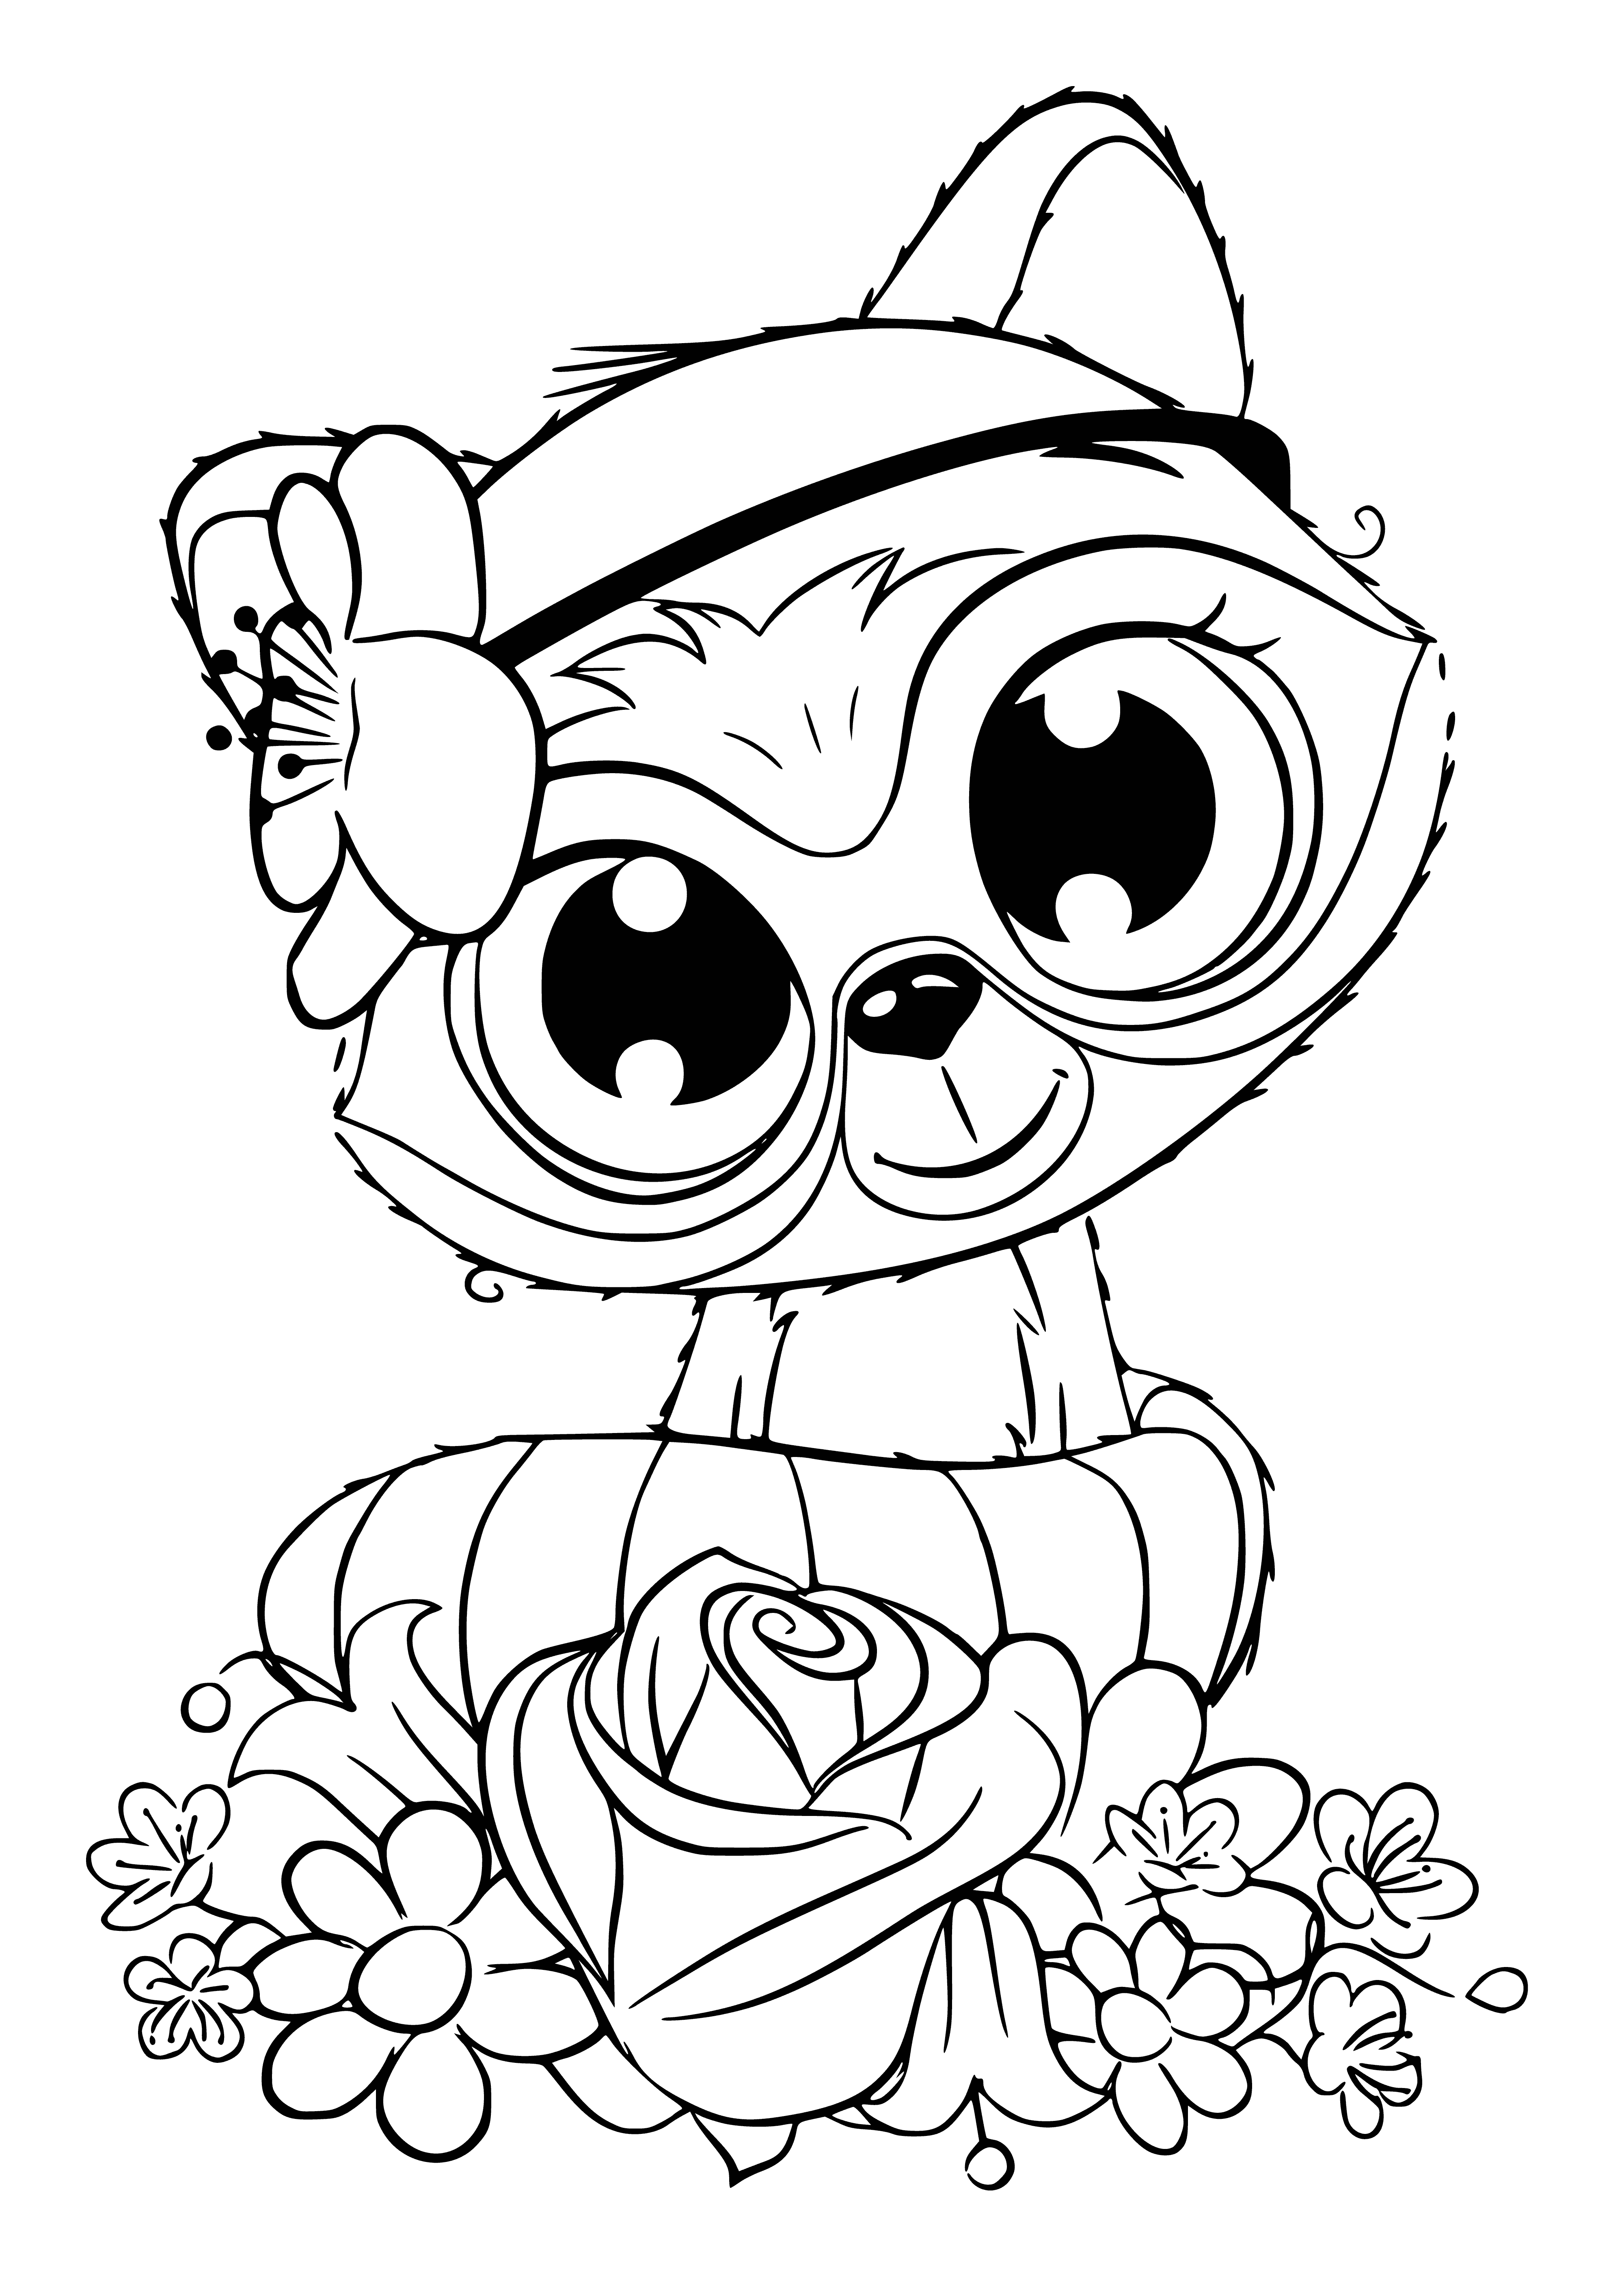 Cute raccoon coloring page